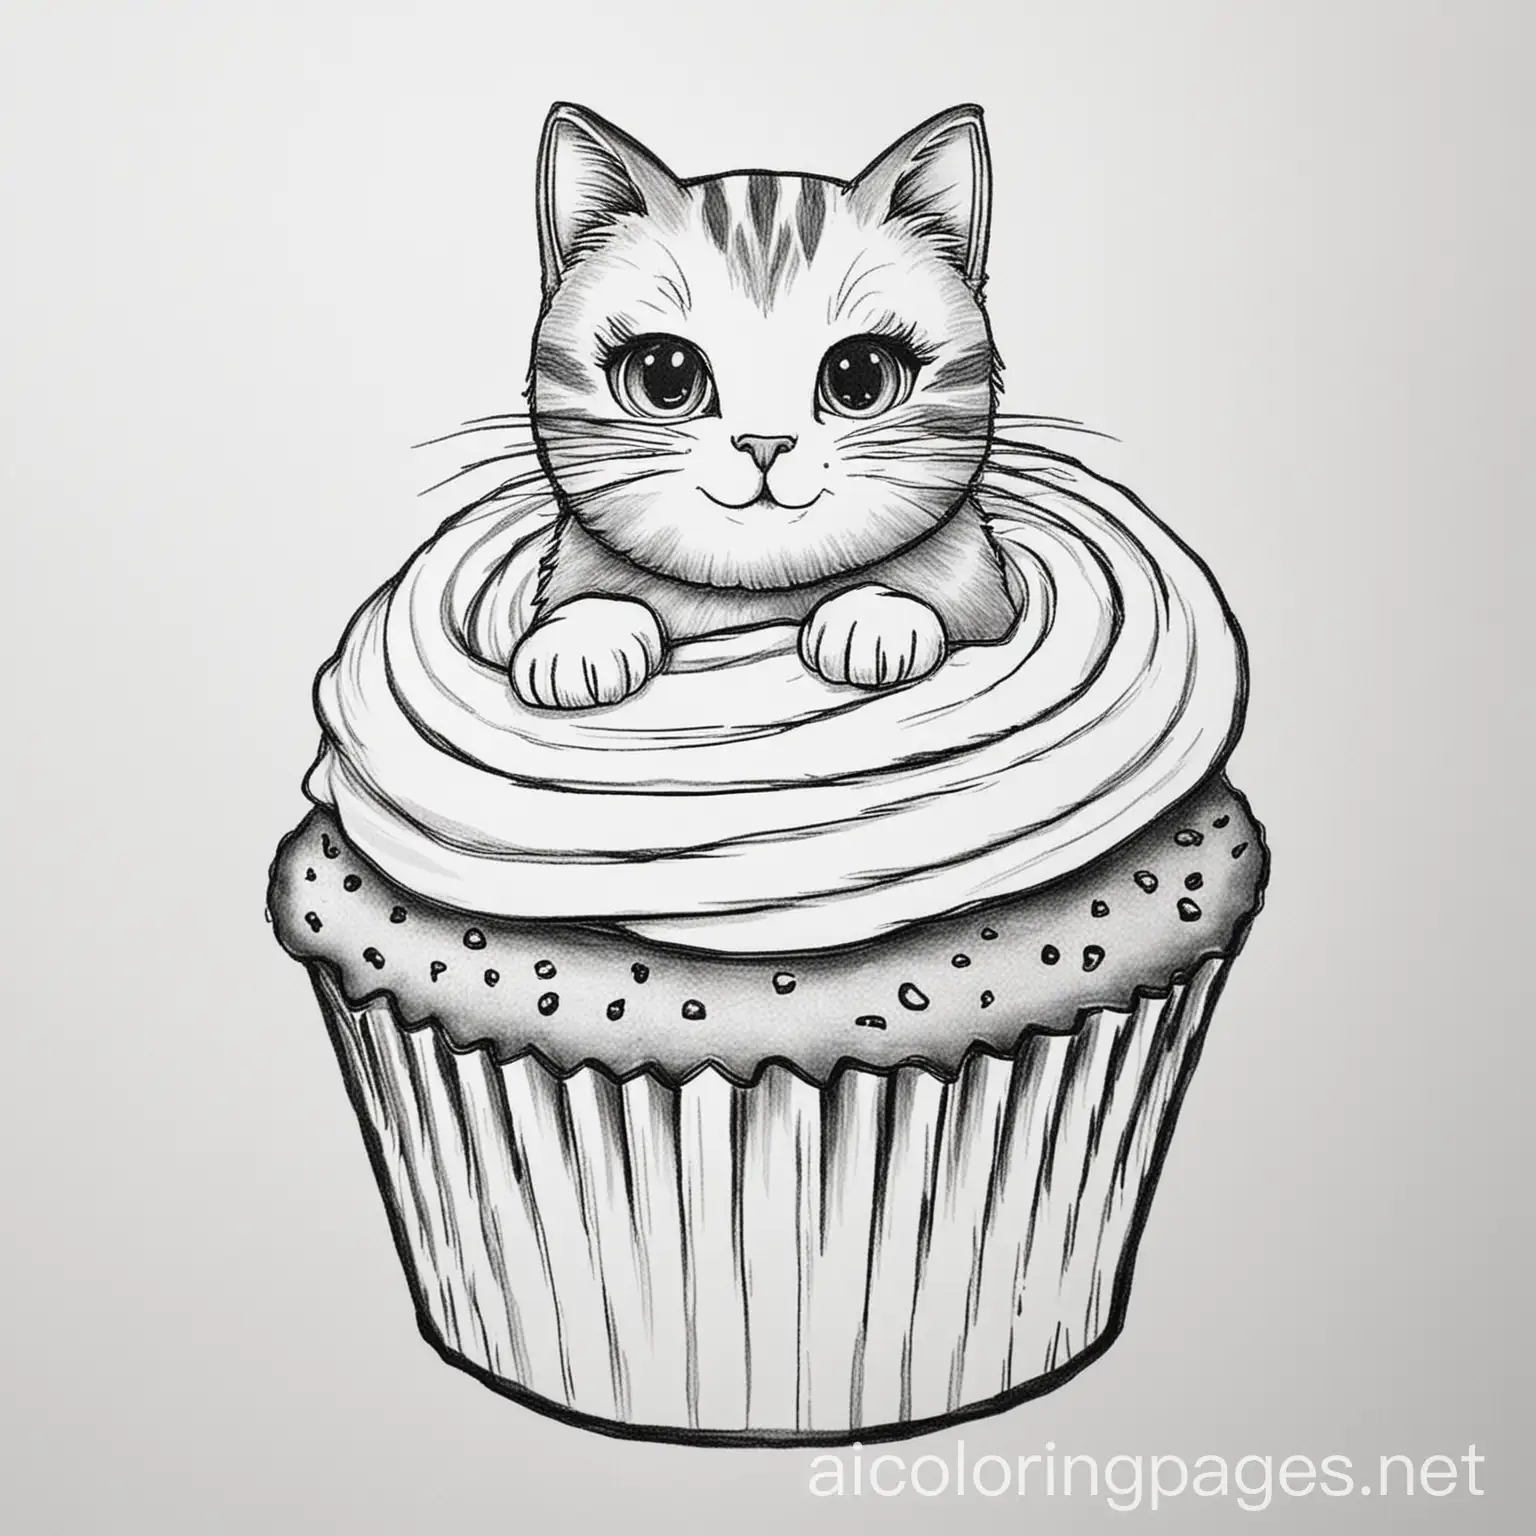 Cat on a cupcake, Coloring Page, black and white, line art, white background, Simplicity, Ample White Space. The background of the coloring page is plain white to make it easy for young children to color within the lines. The outlines of all the subjects are easy to distinguish, making it simple for kids to color without too much difficulty